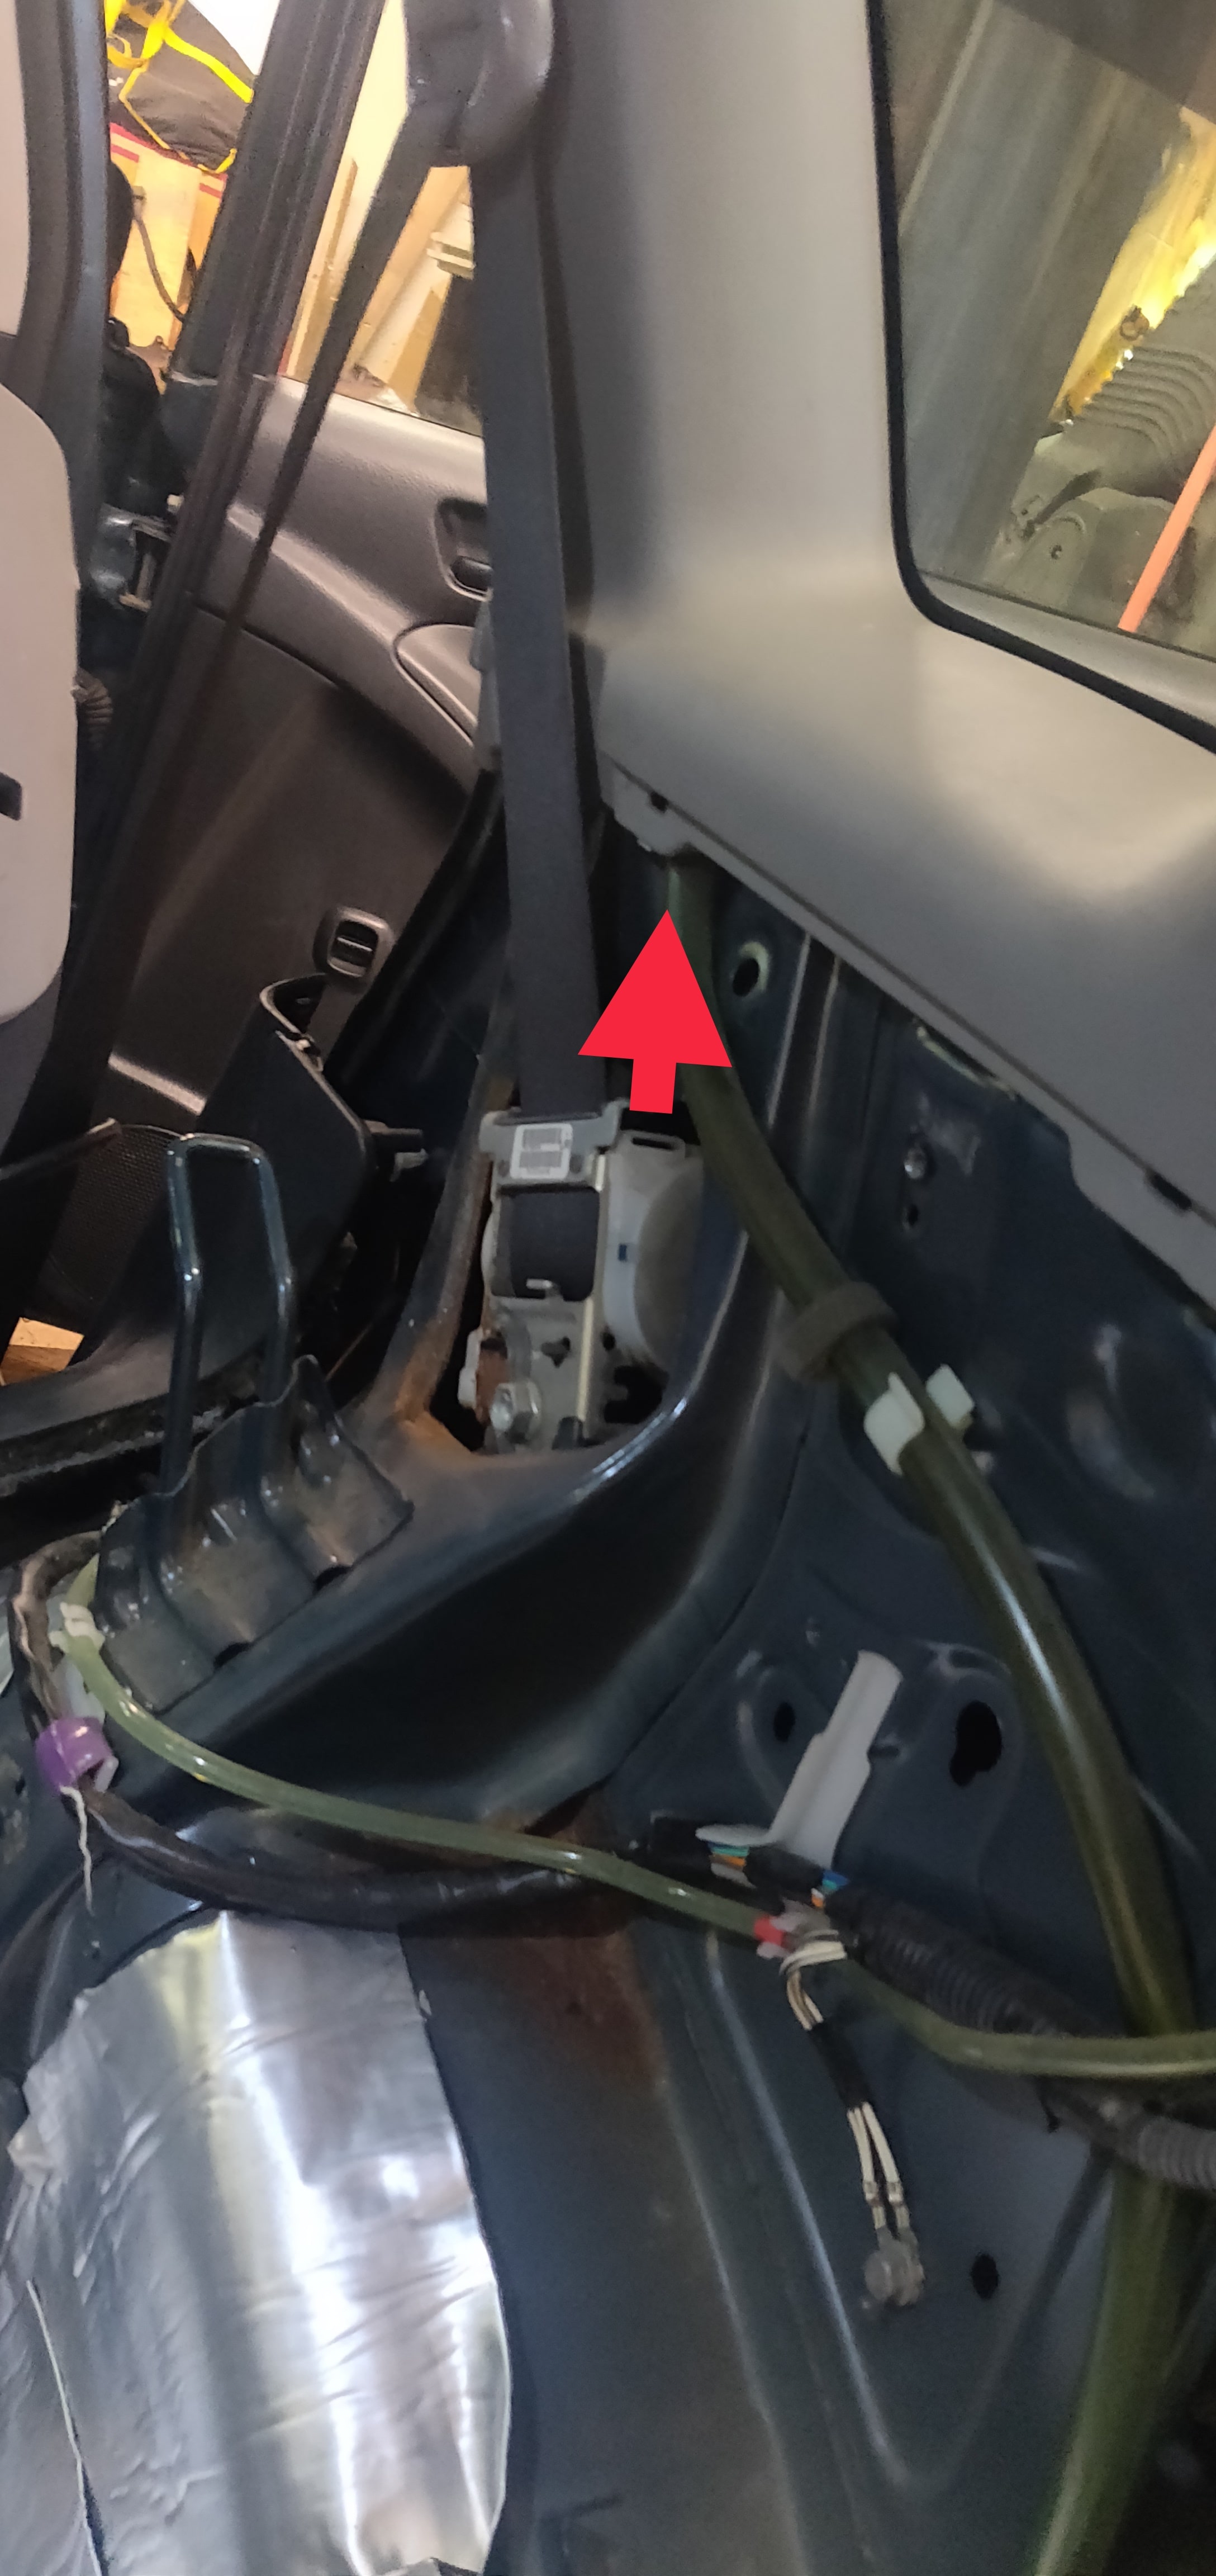 This shows where it comes down the back side of the c-pillar